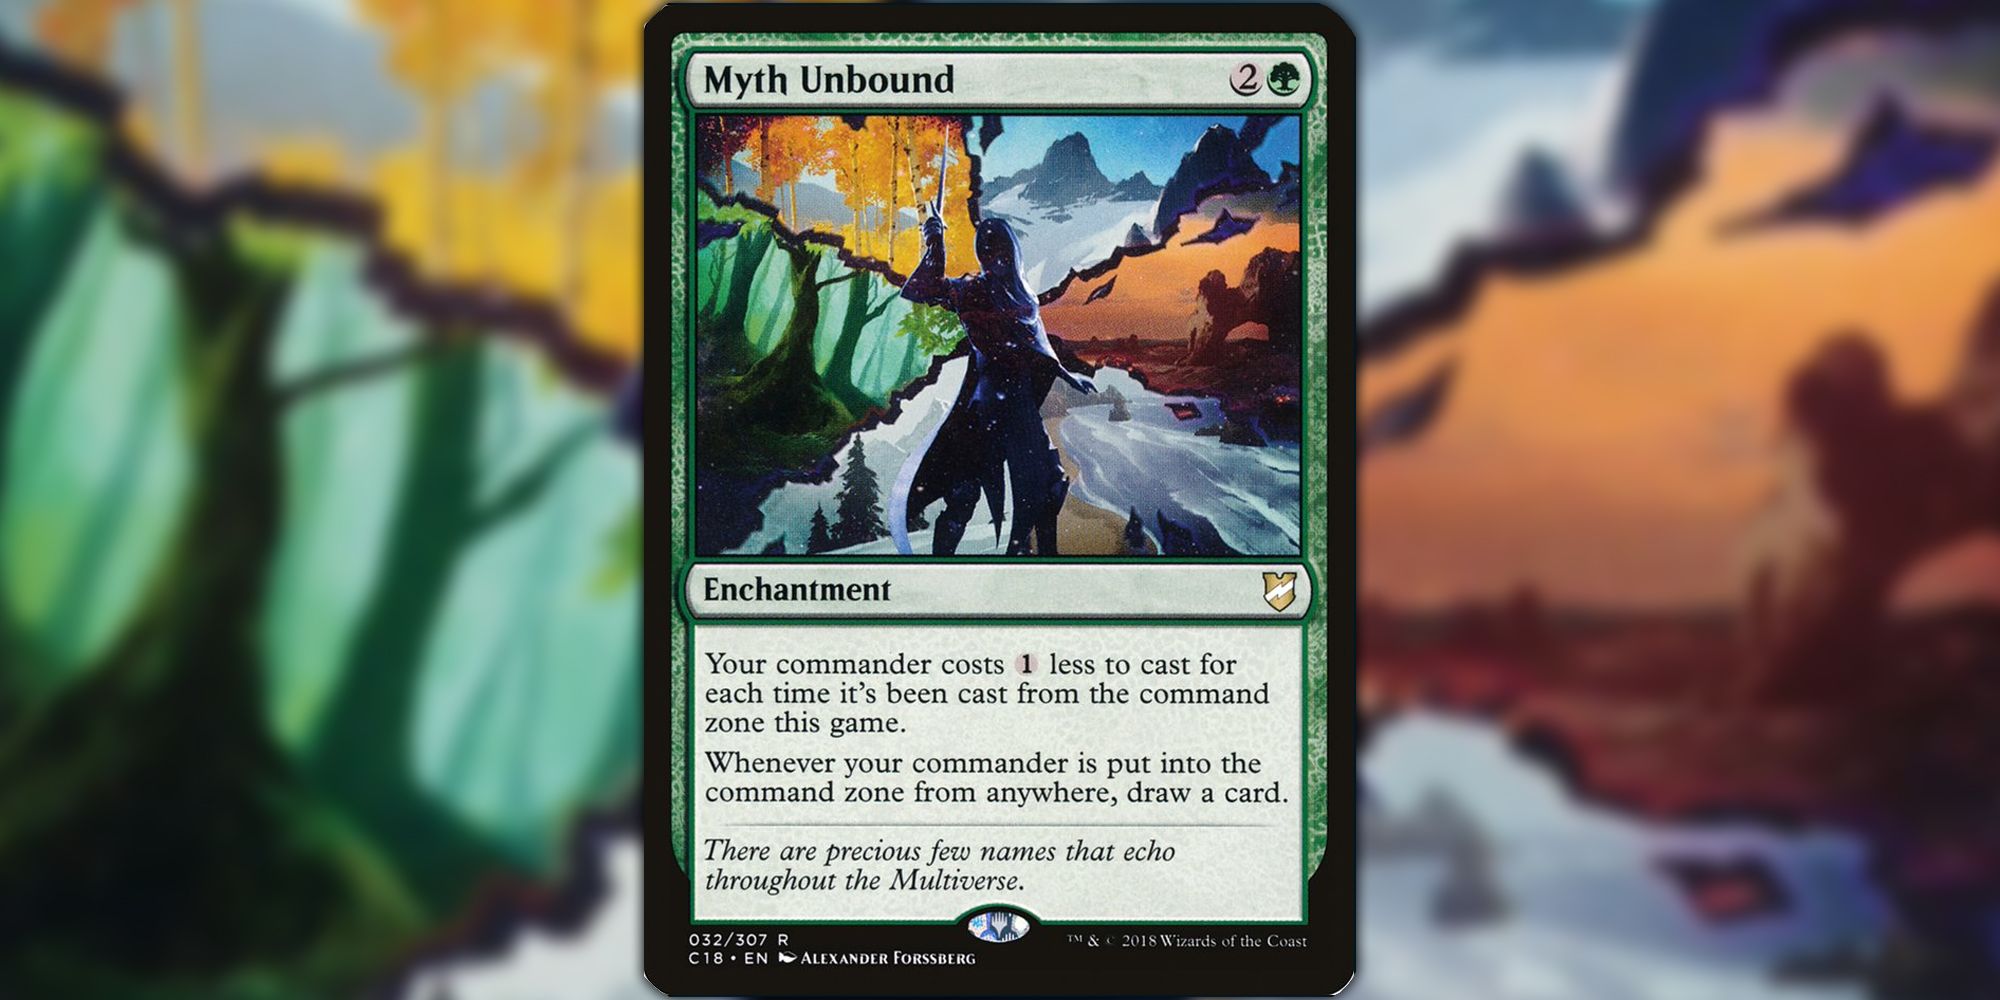 Myth Unbound from Magic The Gathering